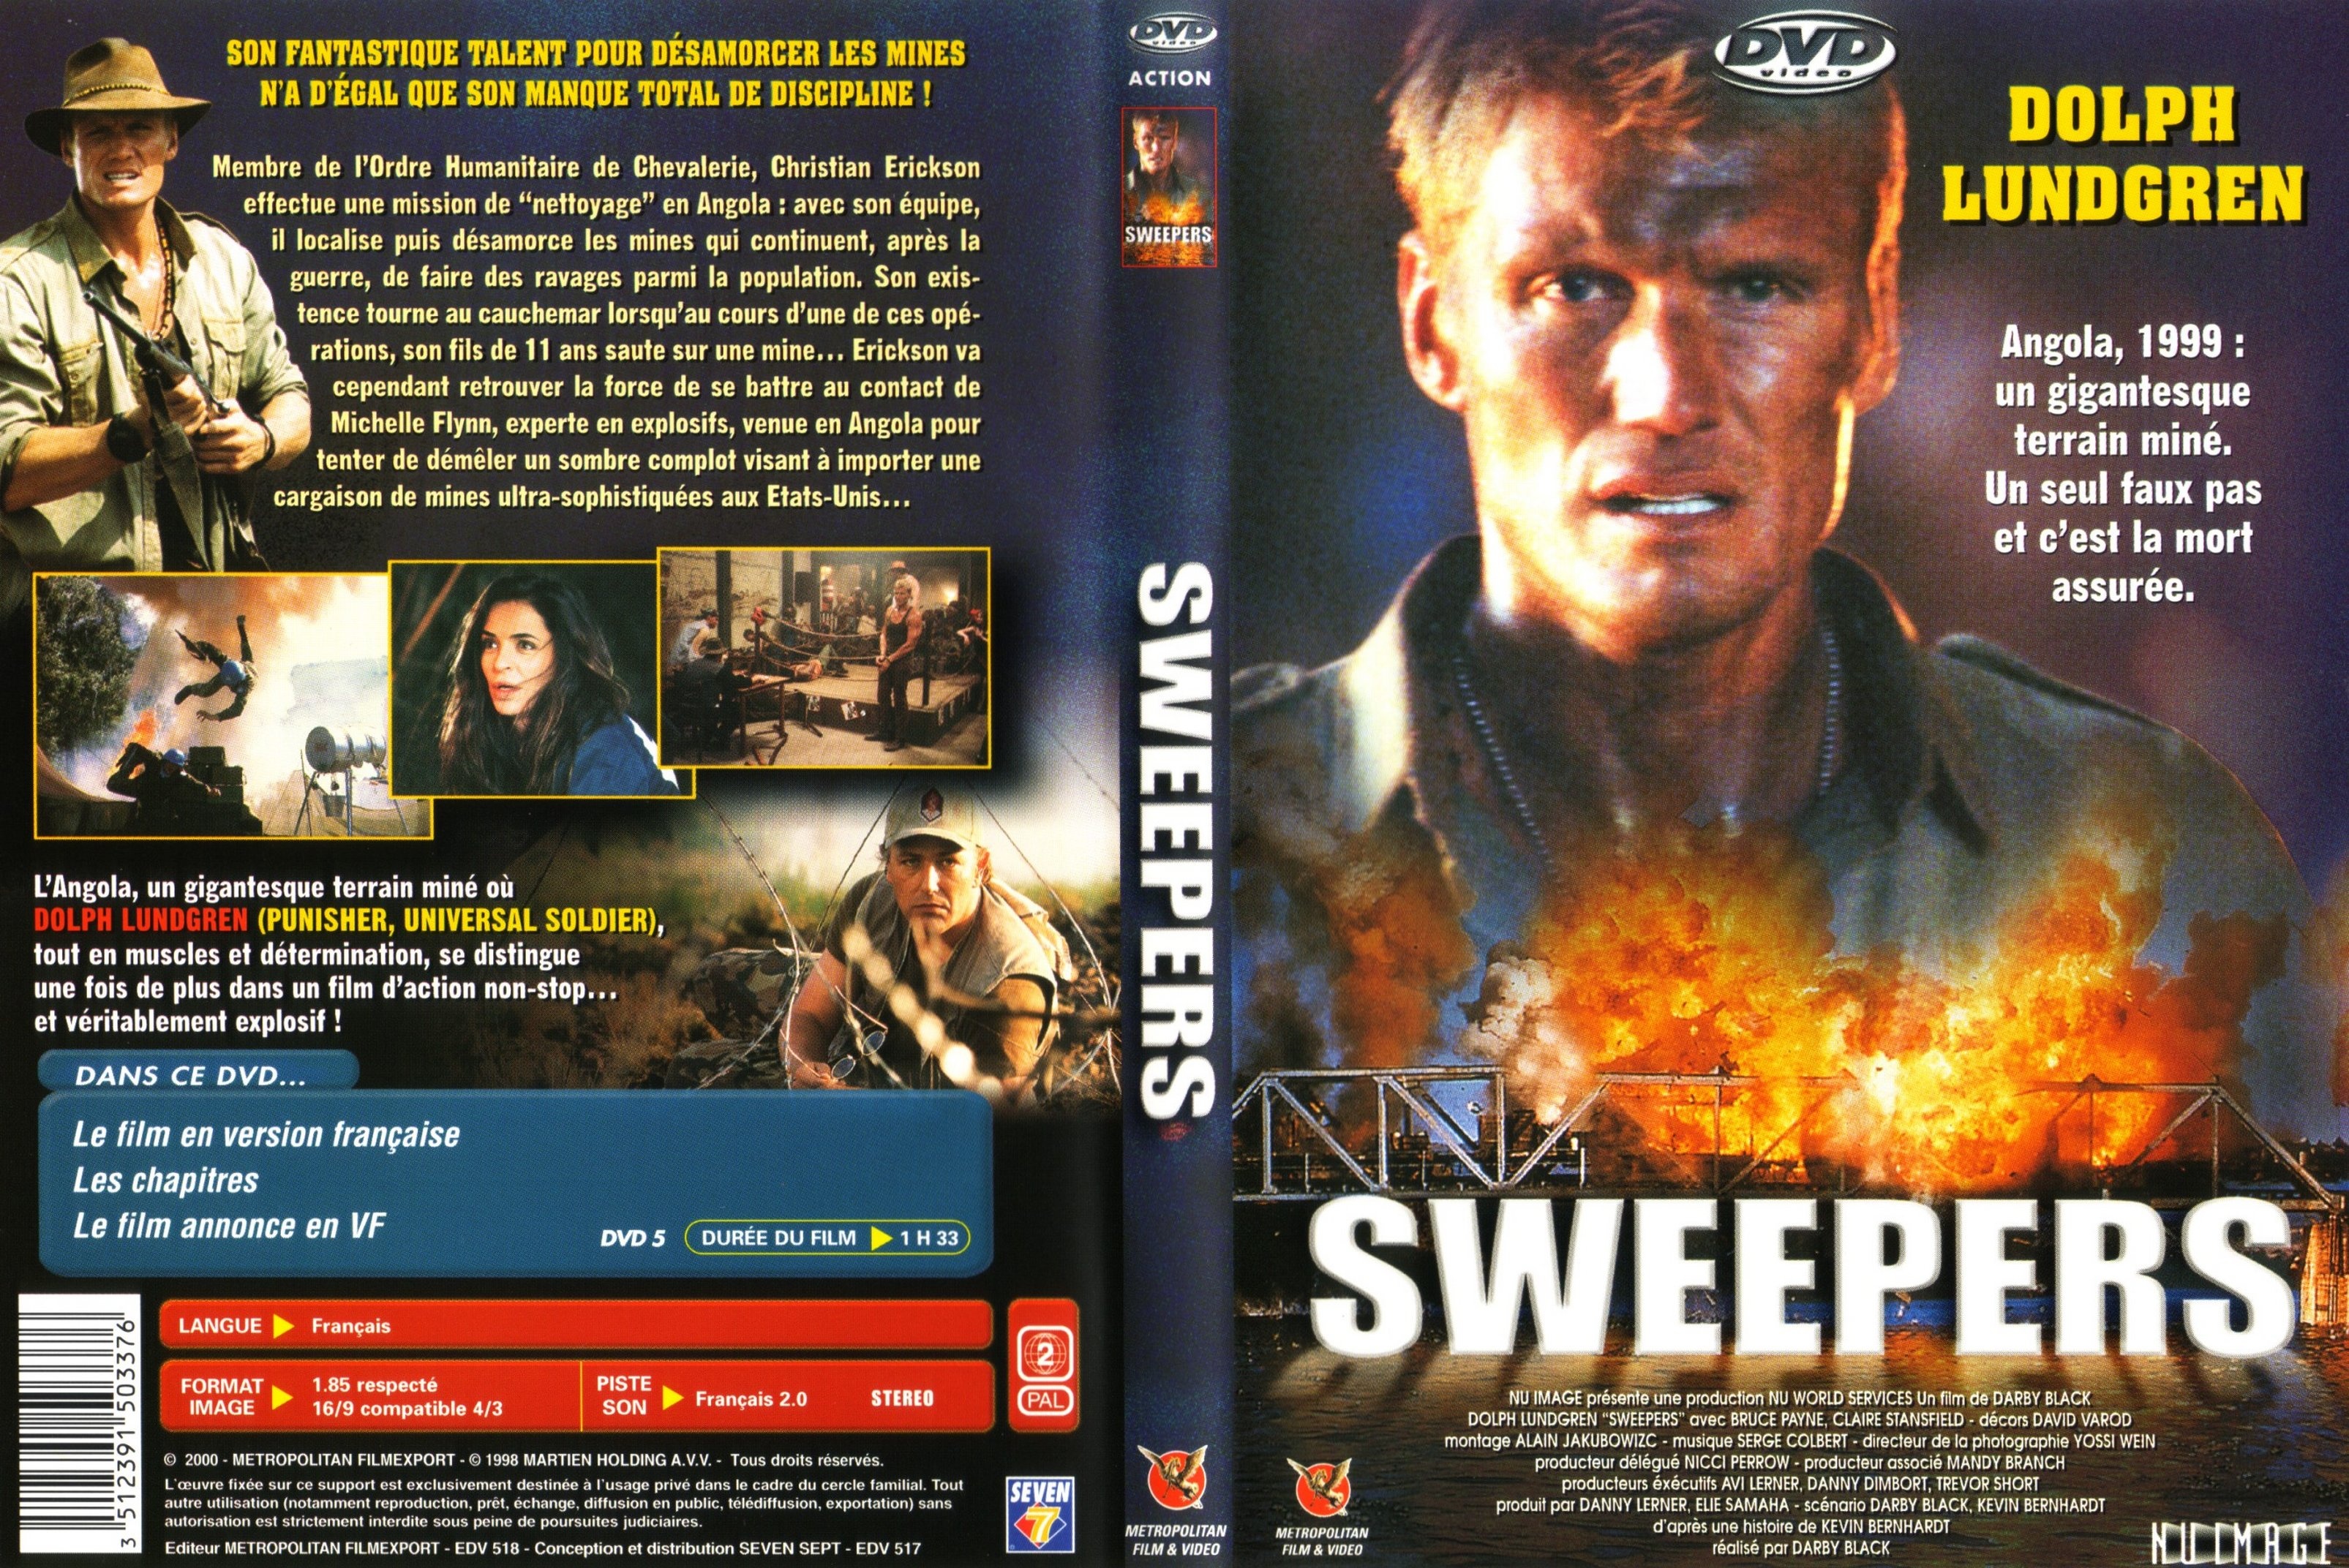 Jaquette DVD Sweepers